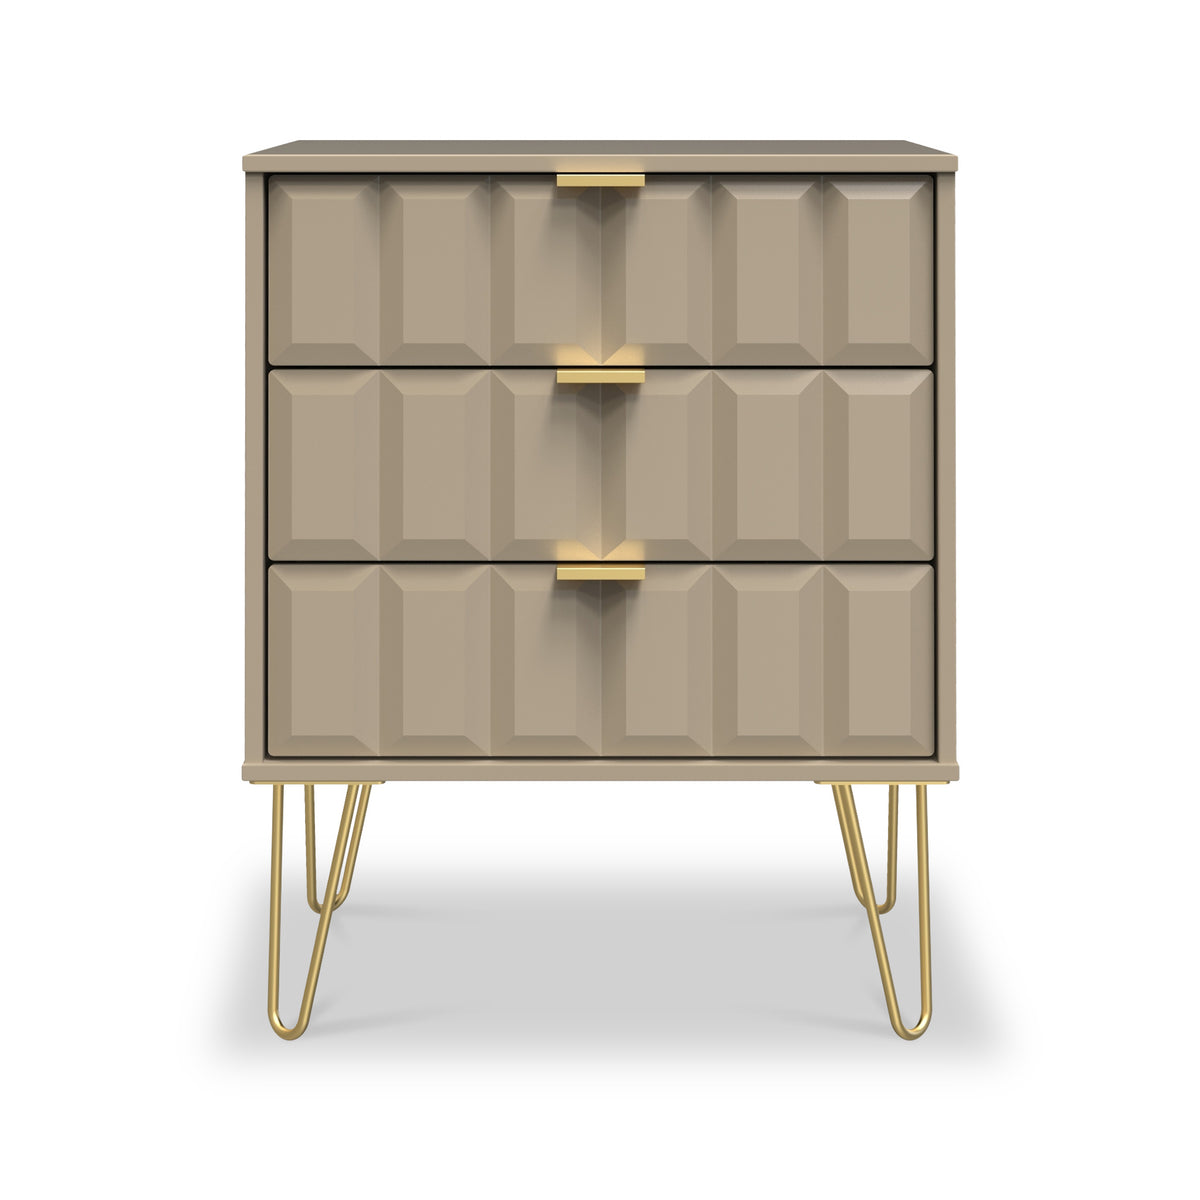 Harlow Taupe 3 Drawer Midi Sideboard with Gold Hairpin Legs from Roseland